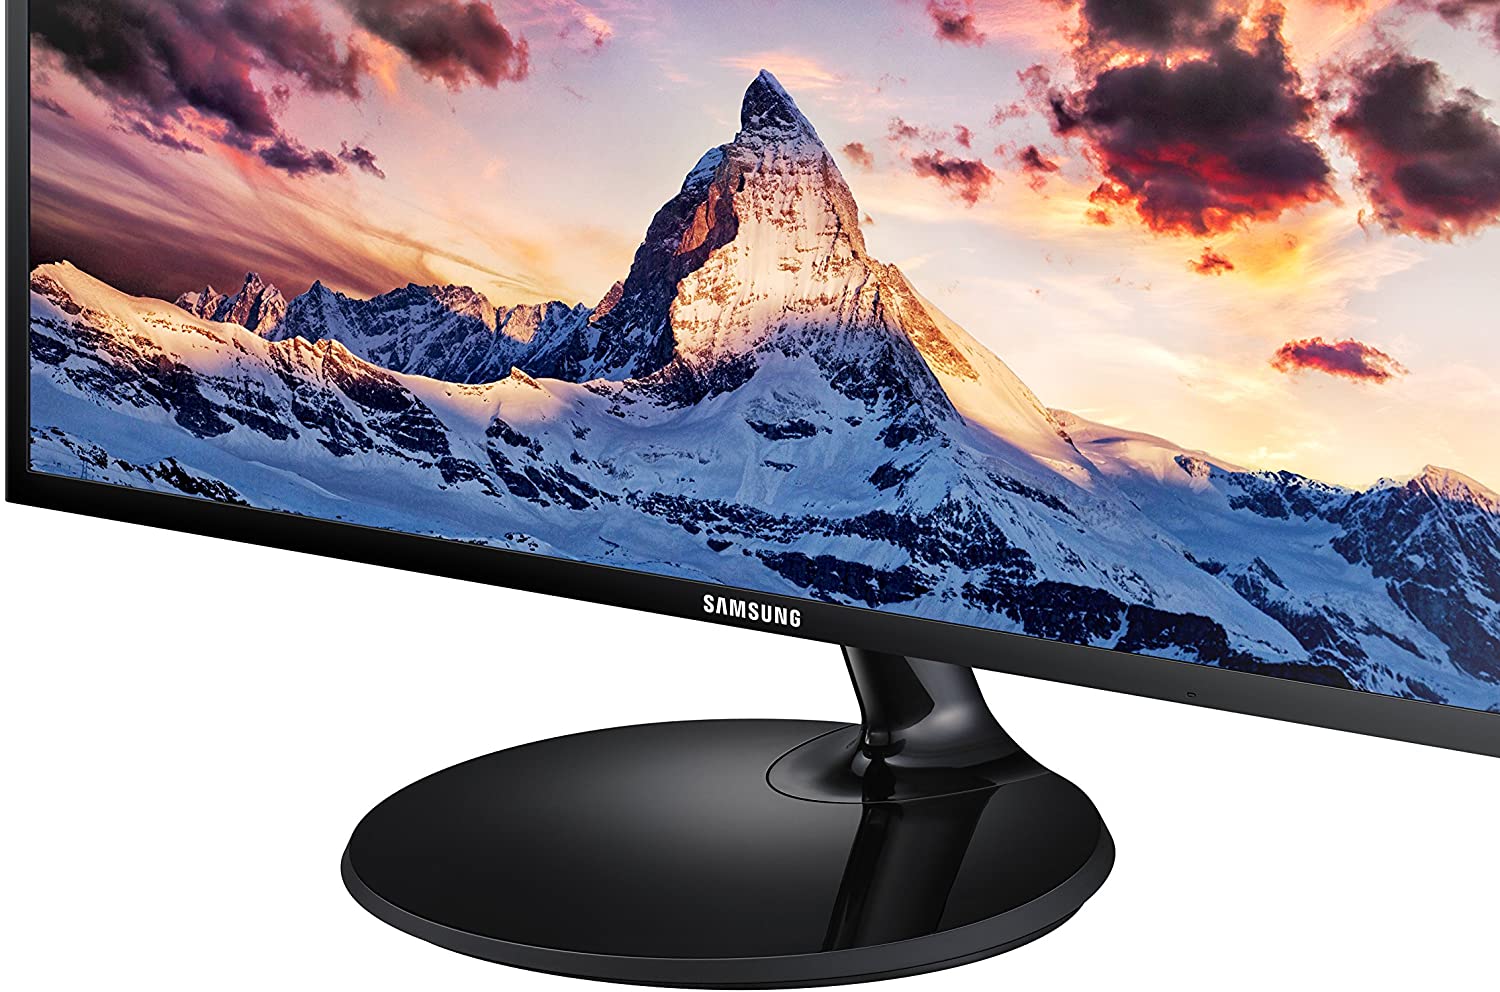 Samsung LS27F354FHNXZA-RB 27" SF354 Series LED Monitor - Certified Refurbished